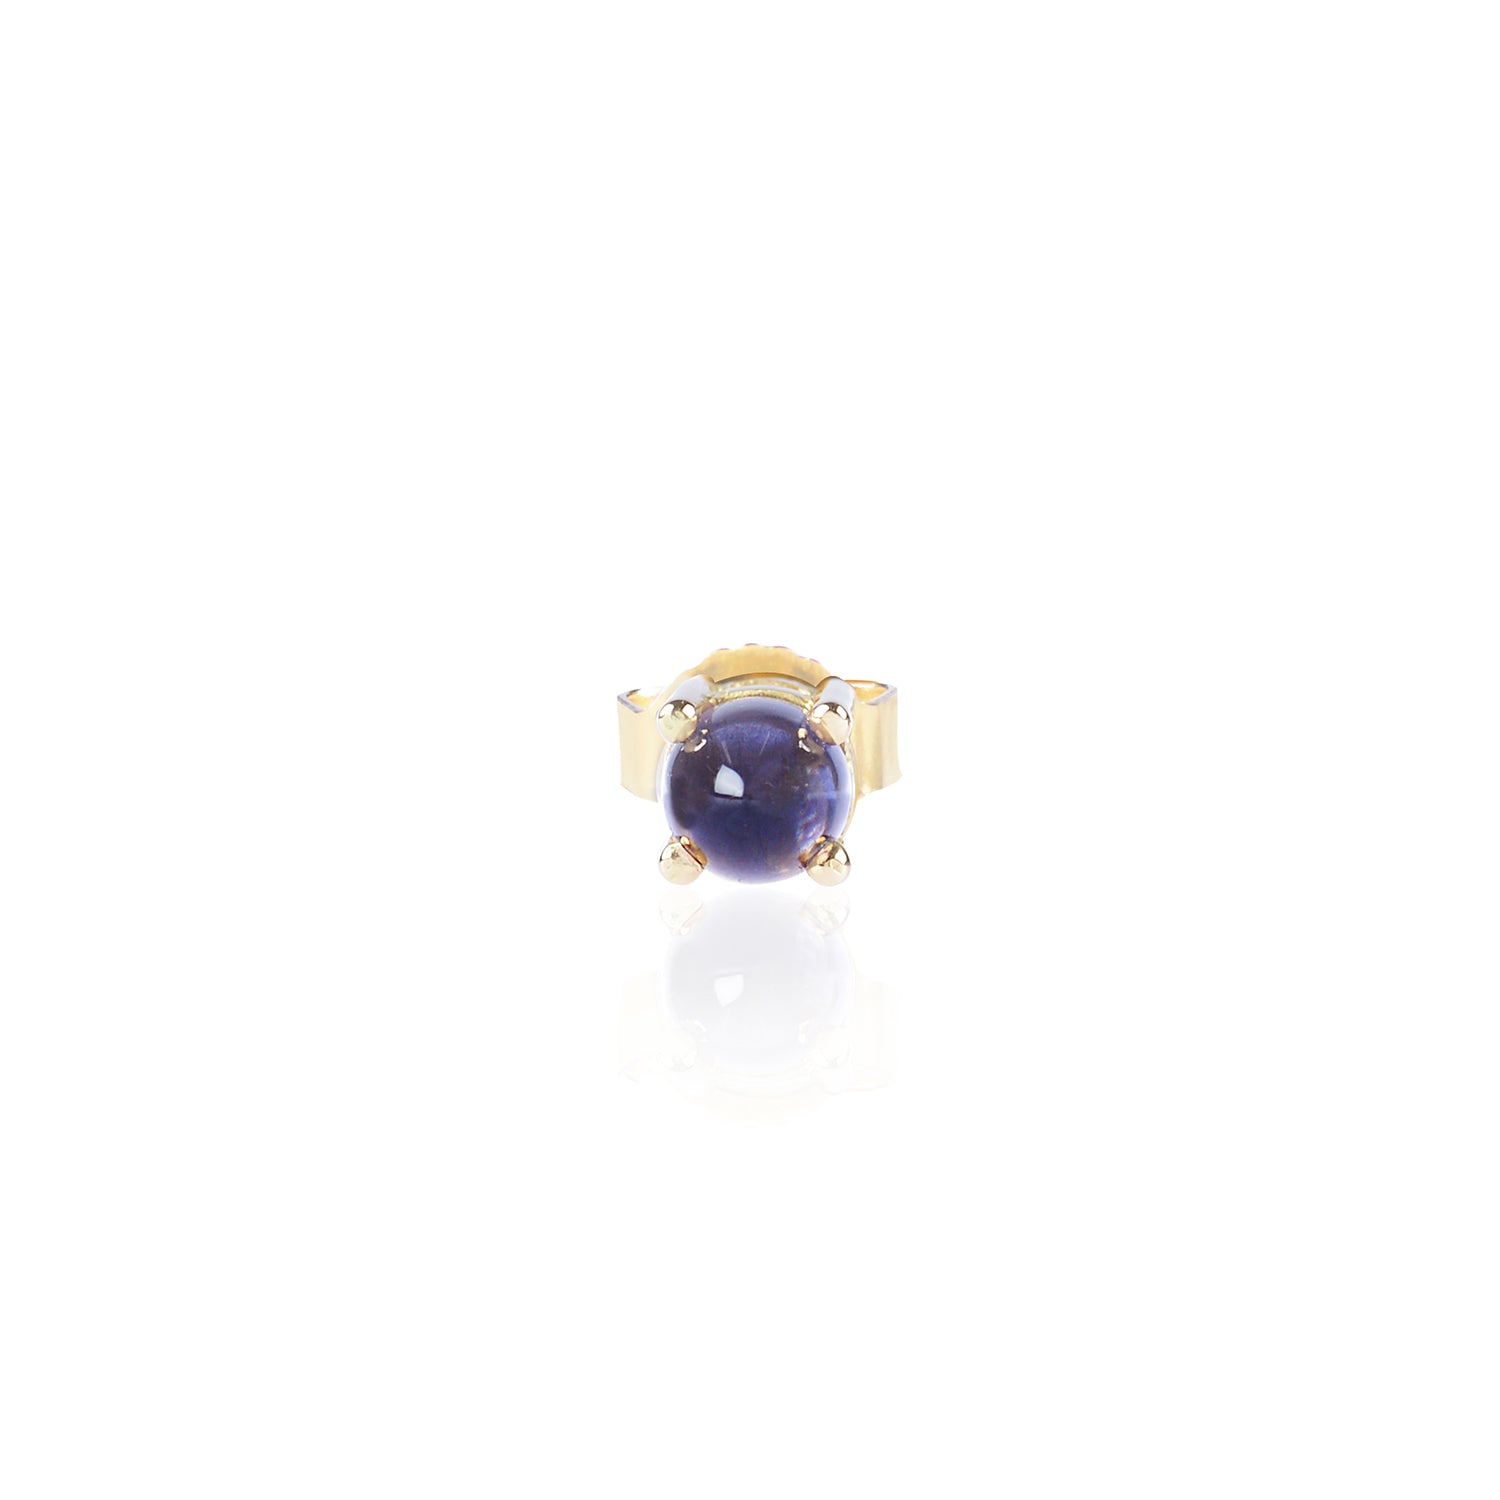 Pointy Blue Iolite Stud in 18ct yellow gold by McFarlane Fine Jewellery